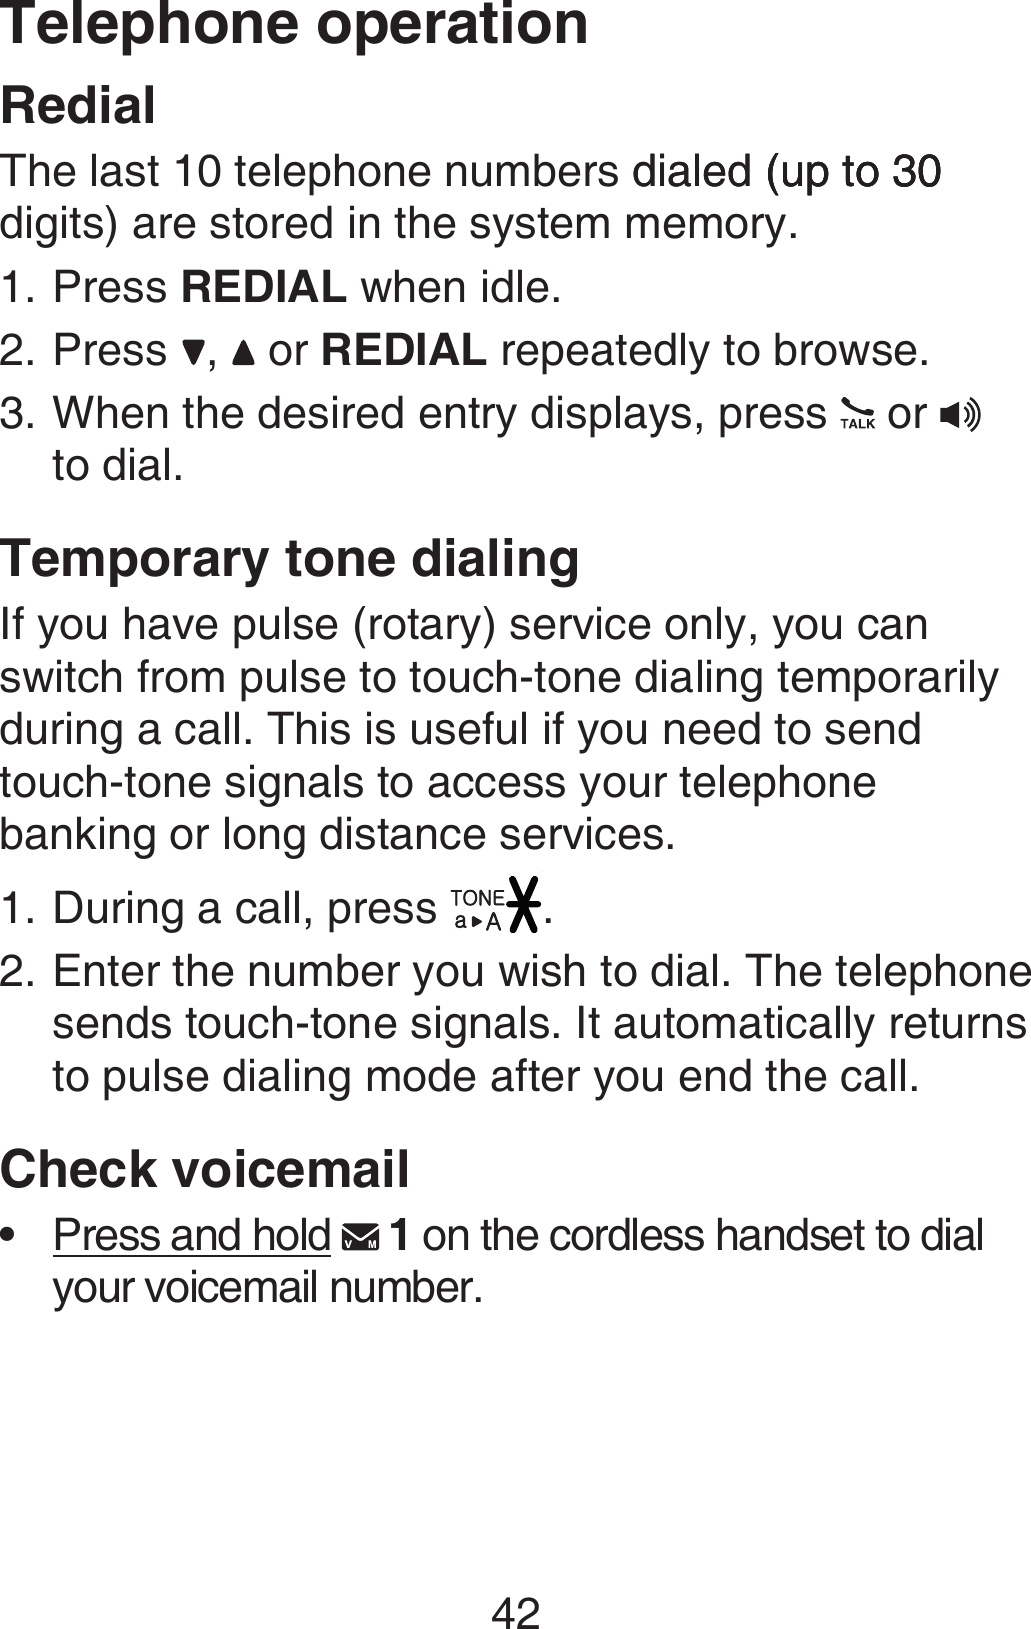 42RedialThe last 10 telephone numbers dialed (up to 30dialed (up to 30 (up to 30 digits) are stored in the system memory.Press REDIAL when idle.Press  ,   or REDIAL repeatedly to browse.When the desired entry displays, press   or    to dial.Temporary tone dialingIf you have pulse (rotary) service only, you can switch from pulse to touch-tone dialing temporarily during a call. This is useful if you need to send touch-tone signals to access your telephone banking or long distance services.During a call, press  .Enter the number you wish to dial. The telephone sends touch-tone signals. It automatically returns to pulse dialing mode after you end the call.Check voicemailPress and hold   1 on the cordless handset to dial your voicemail number.1.2.3.1.2.•Telephone operation